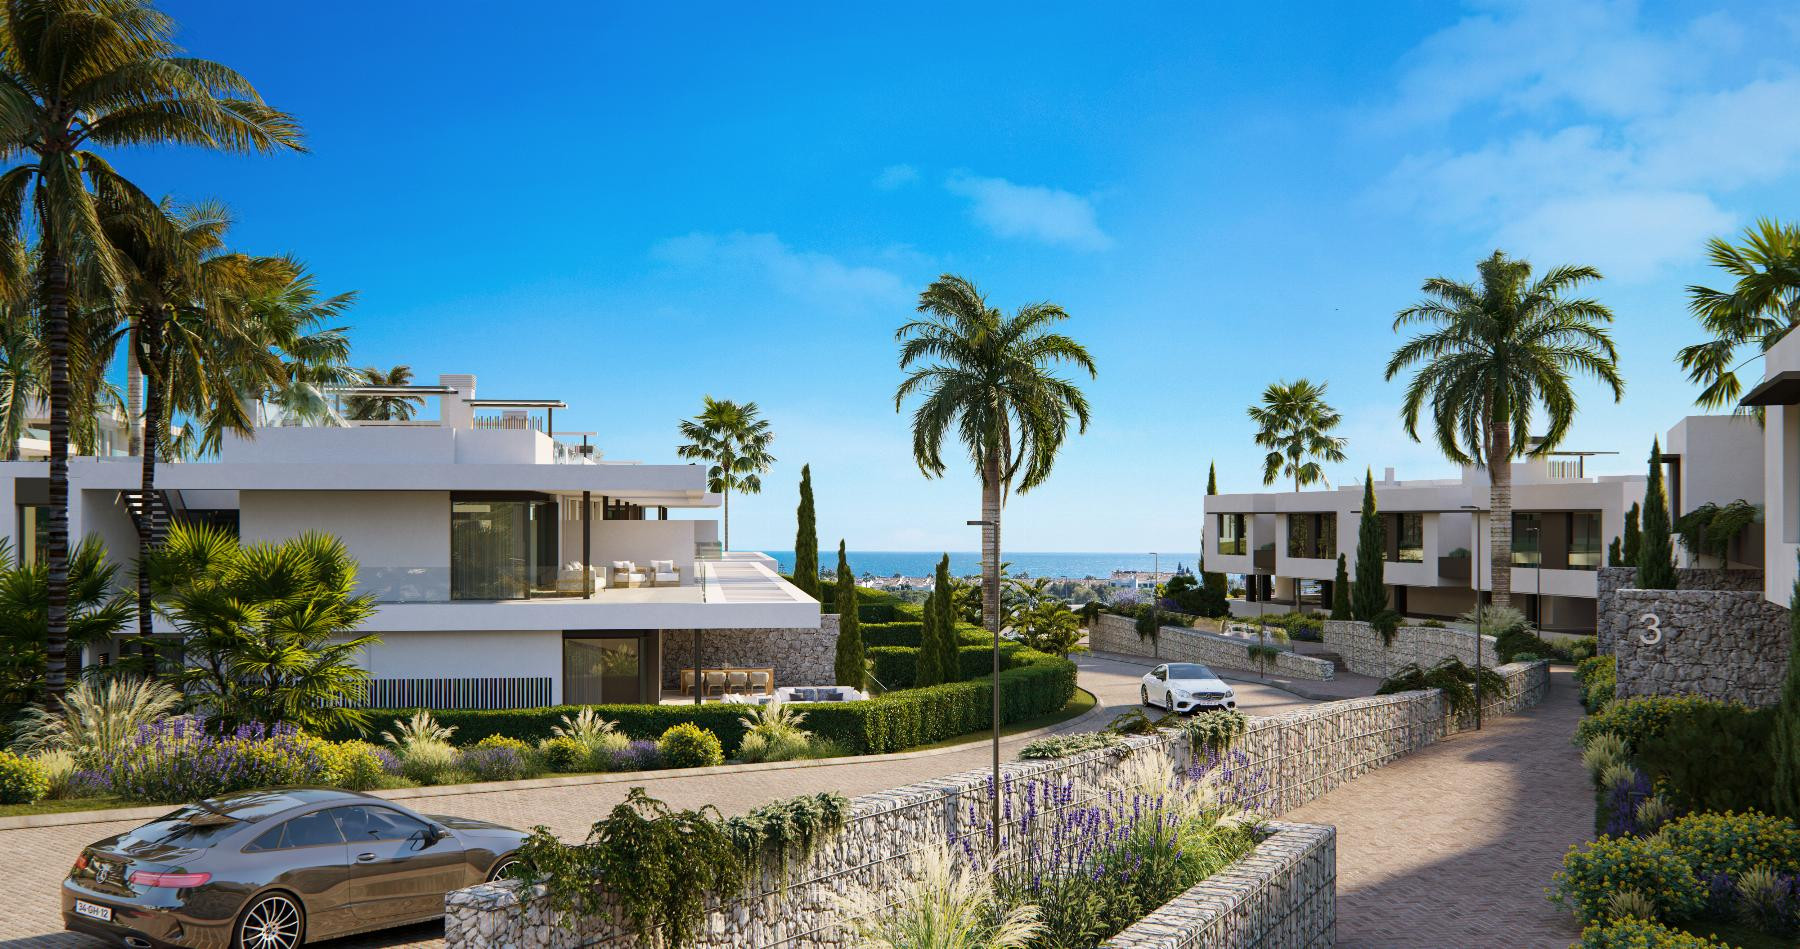 Stunning duplex penthouse in exclusive gated community 10 minutes from the center of Marbella and golf courses. | Image 8